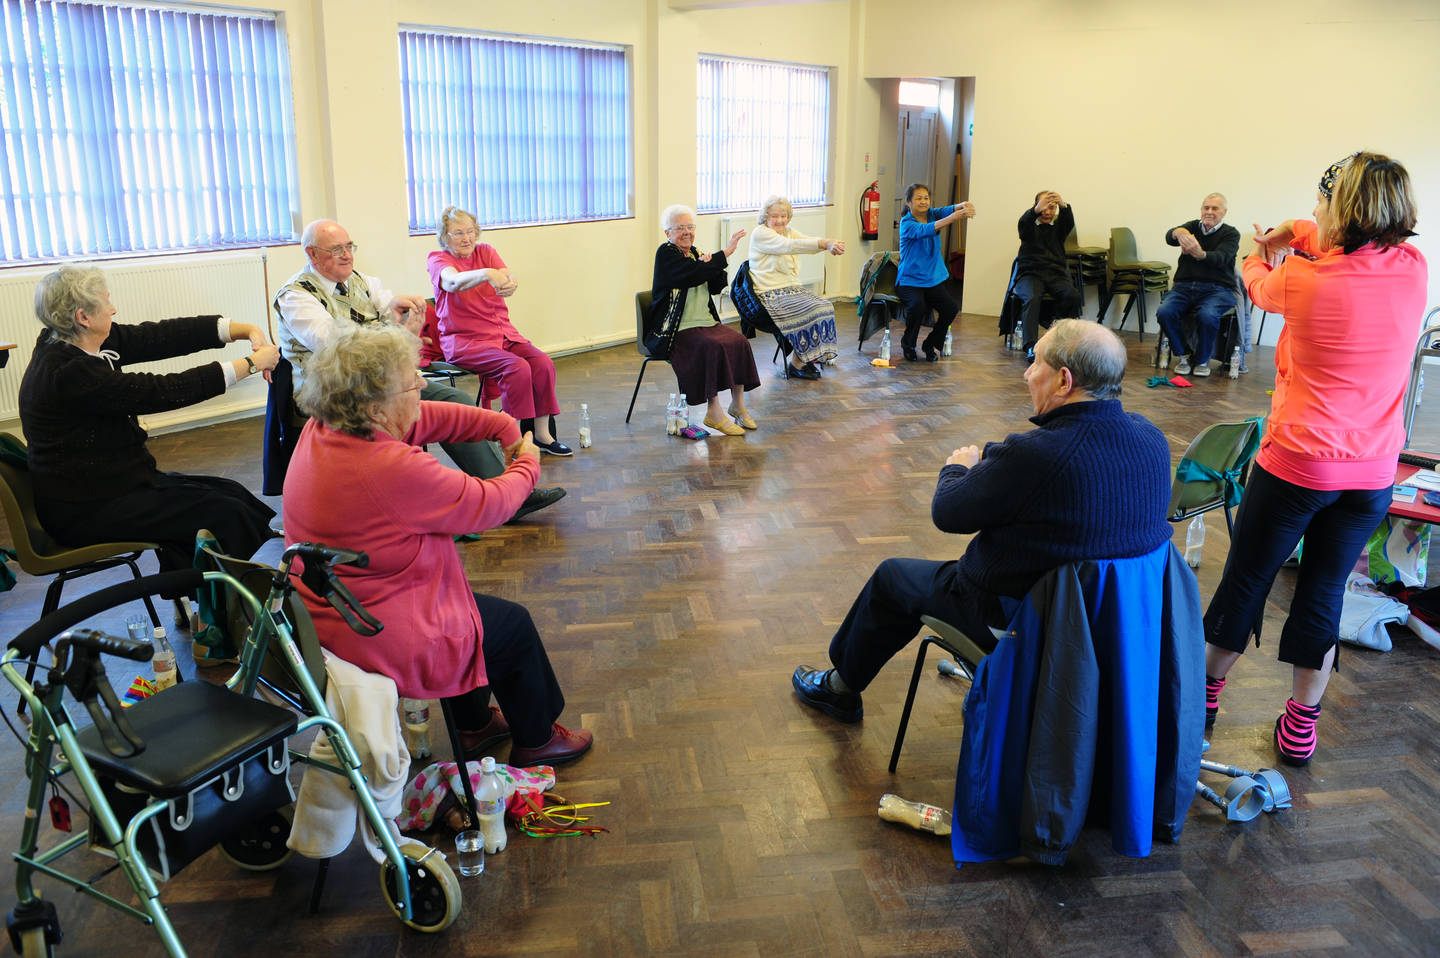 Older people taking part in an exercise class